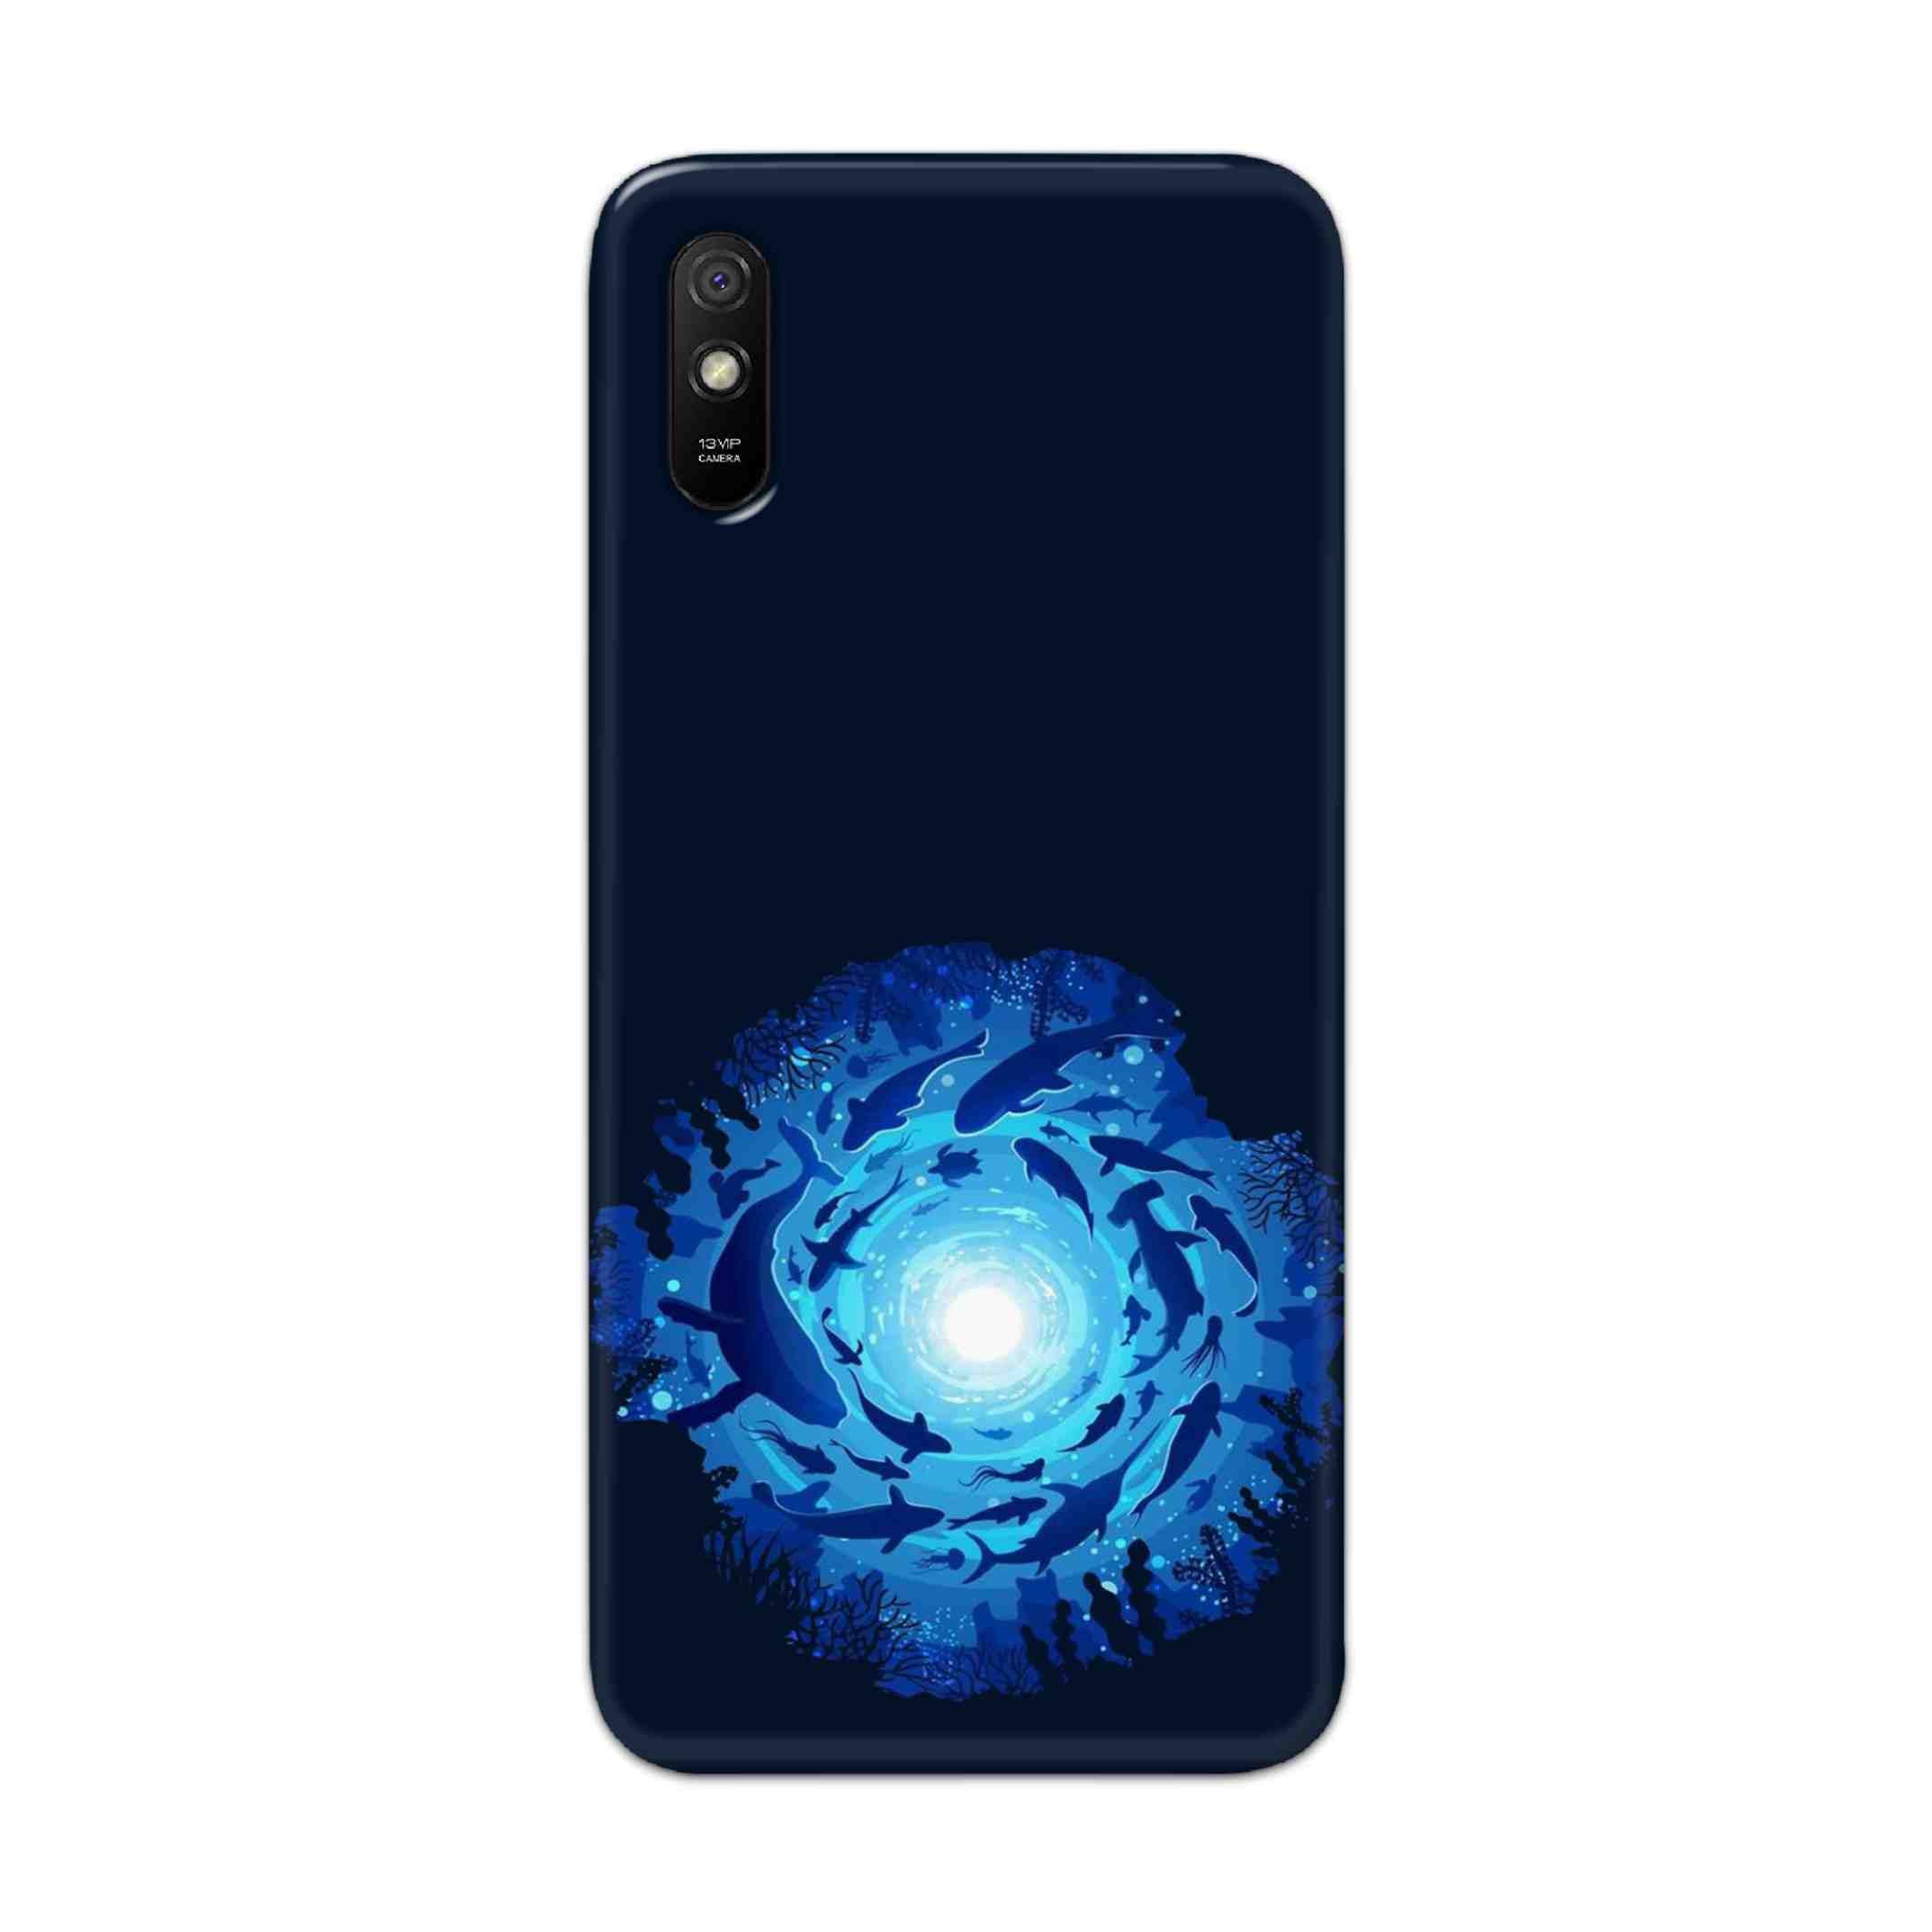 Buy Blue Whale Hard Back Mobile Phone Case Cover For Redmi 9A Online